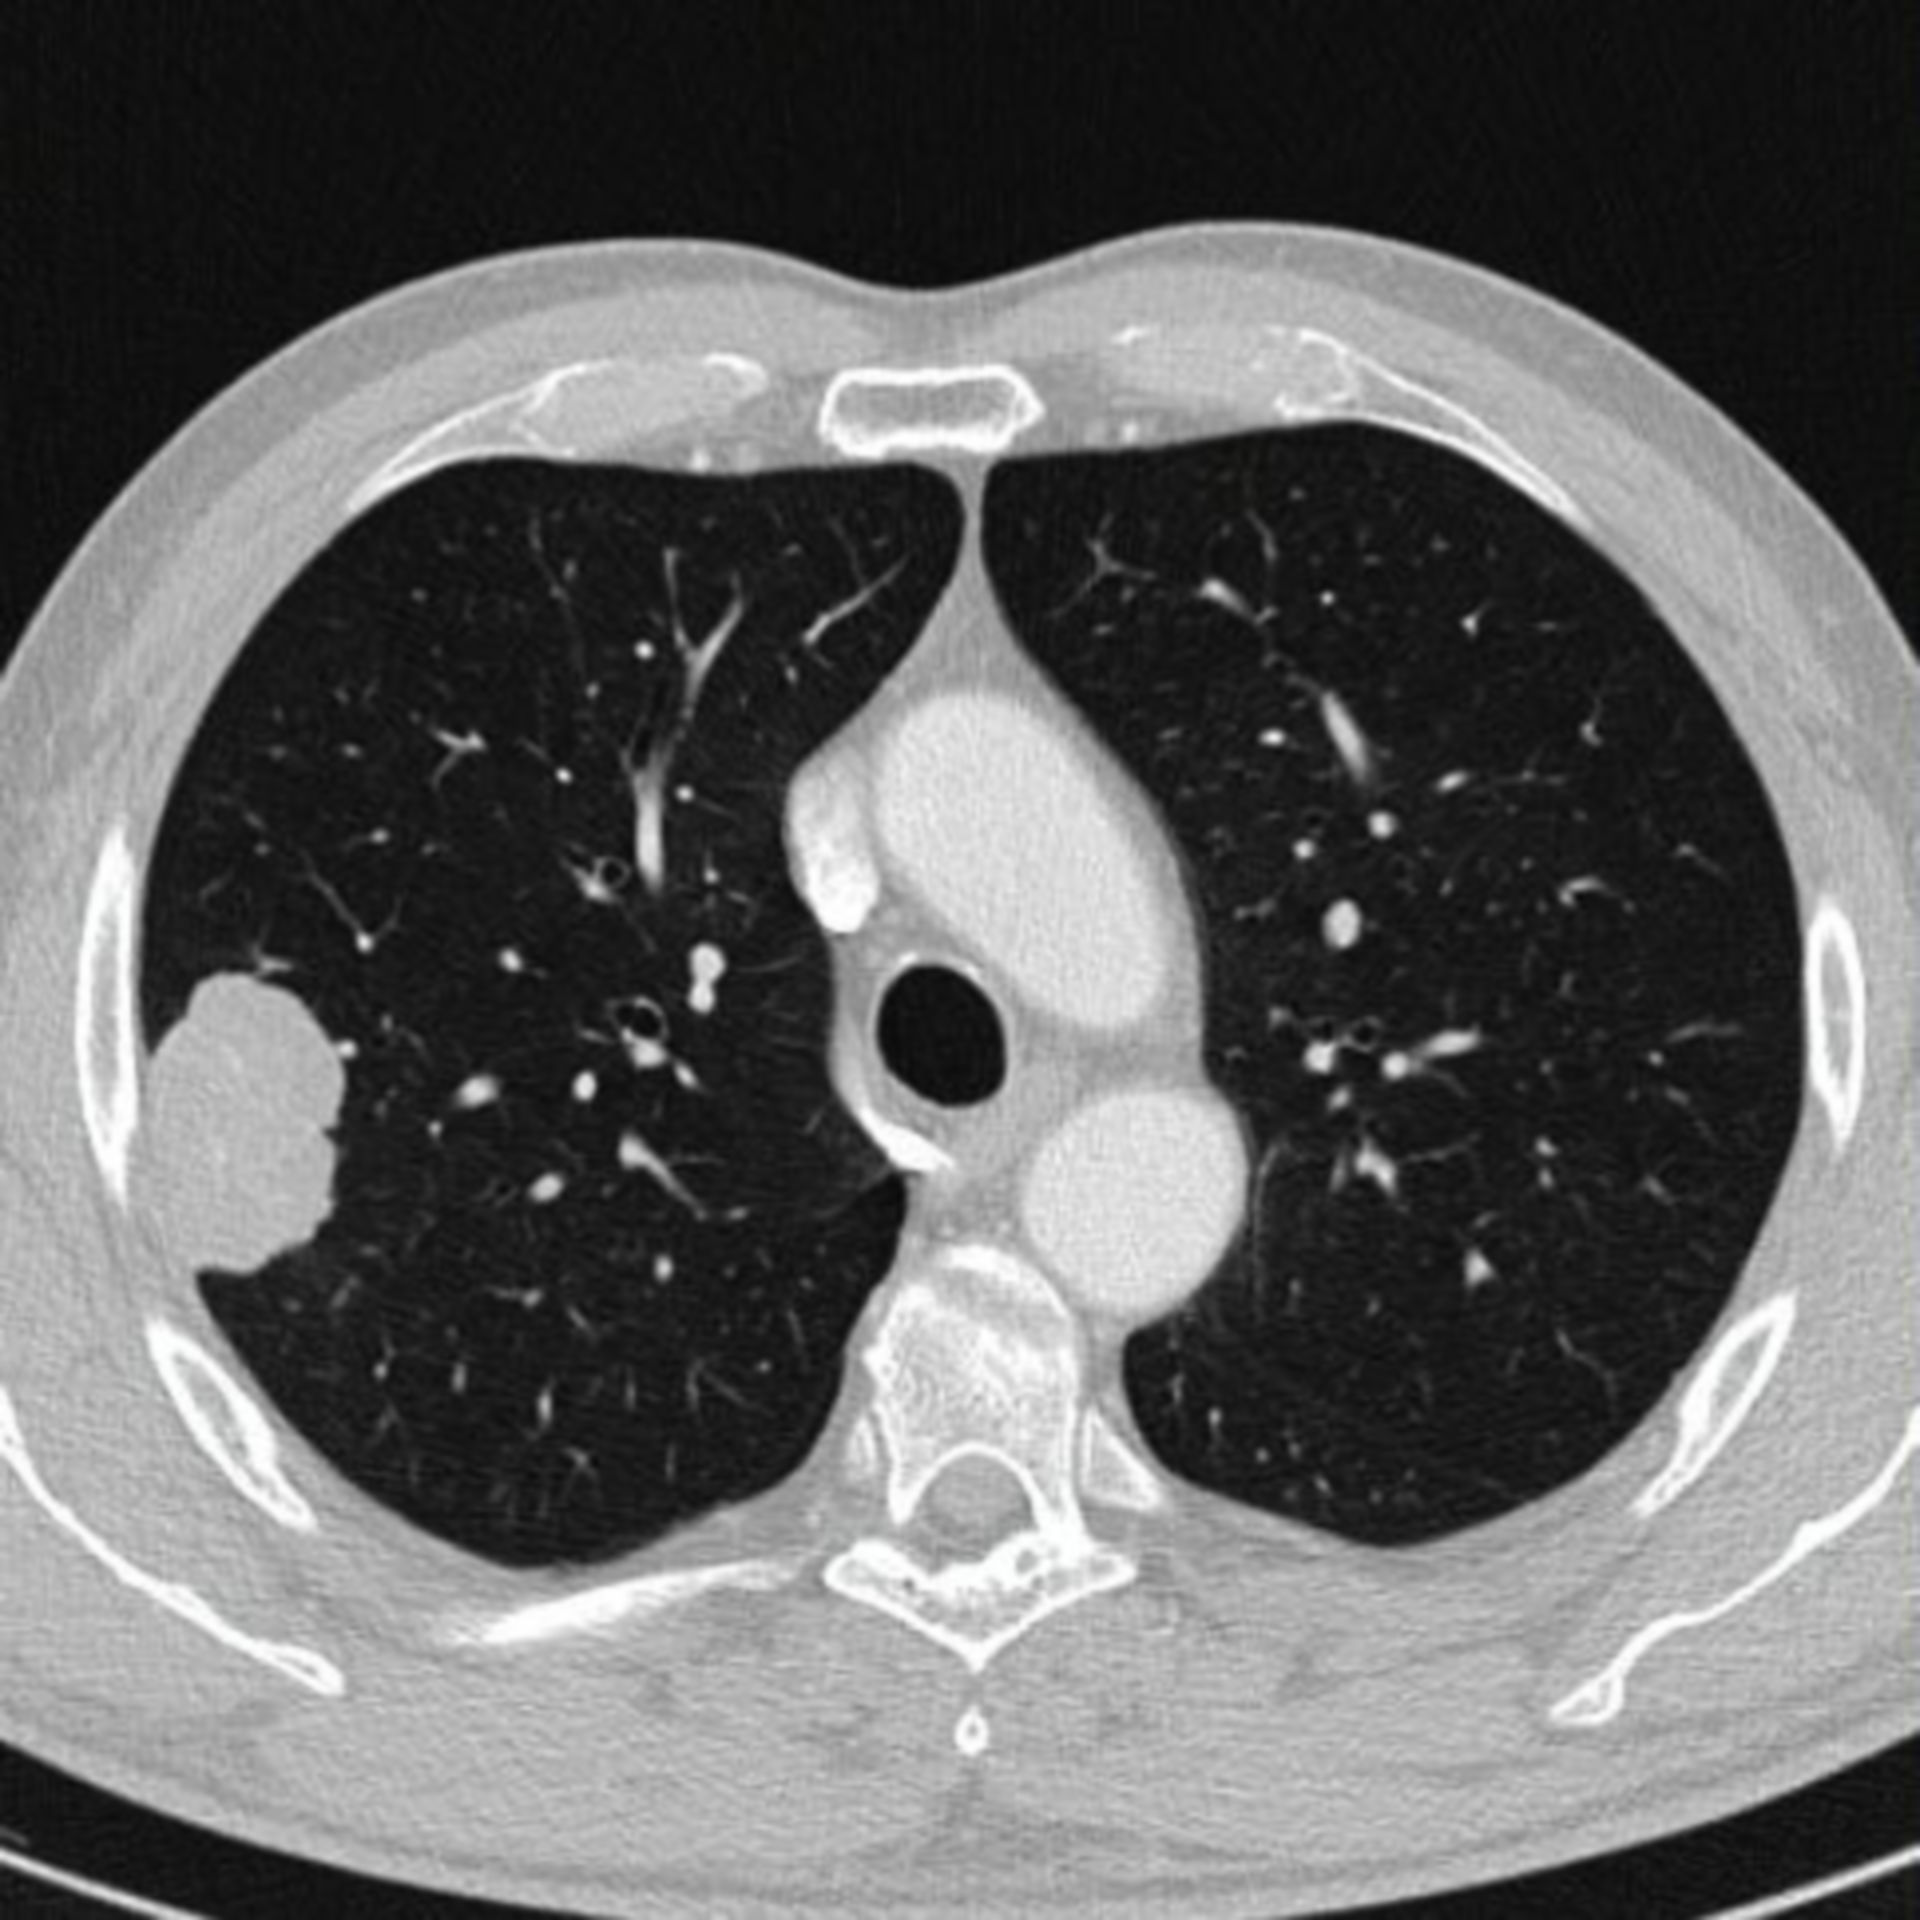 CT lung